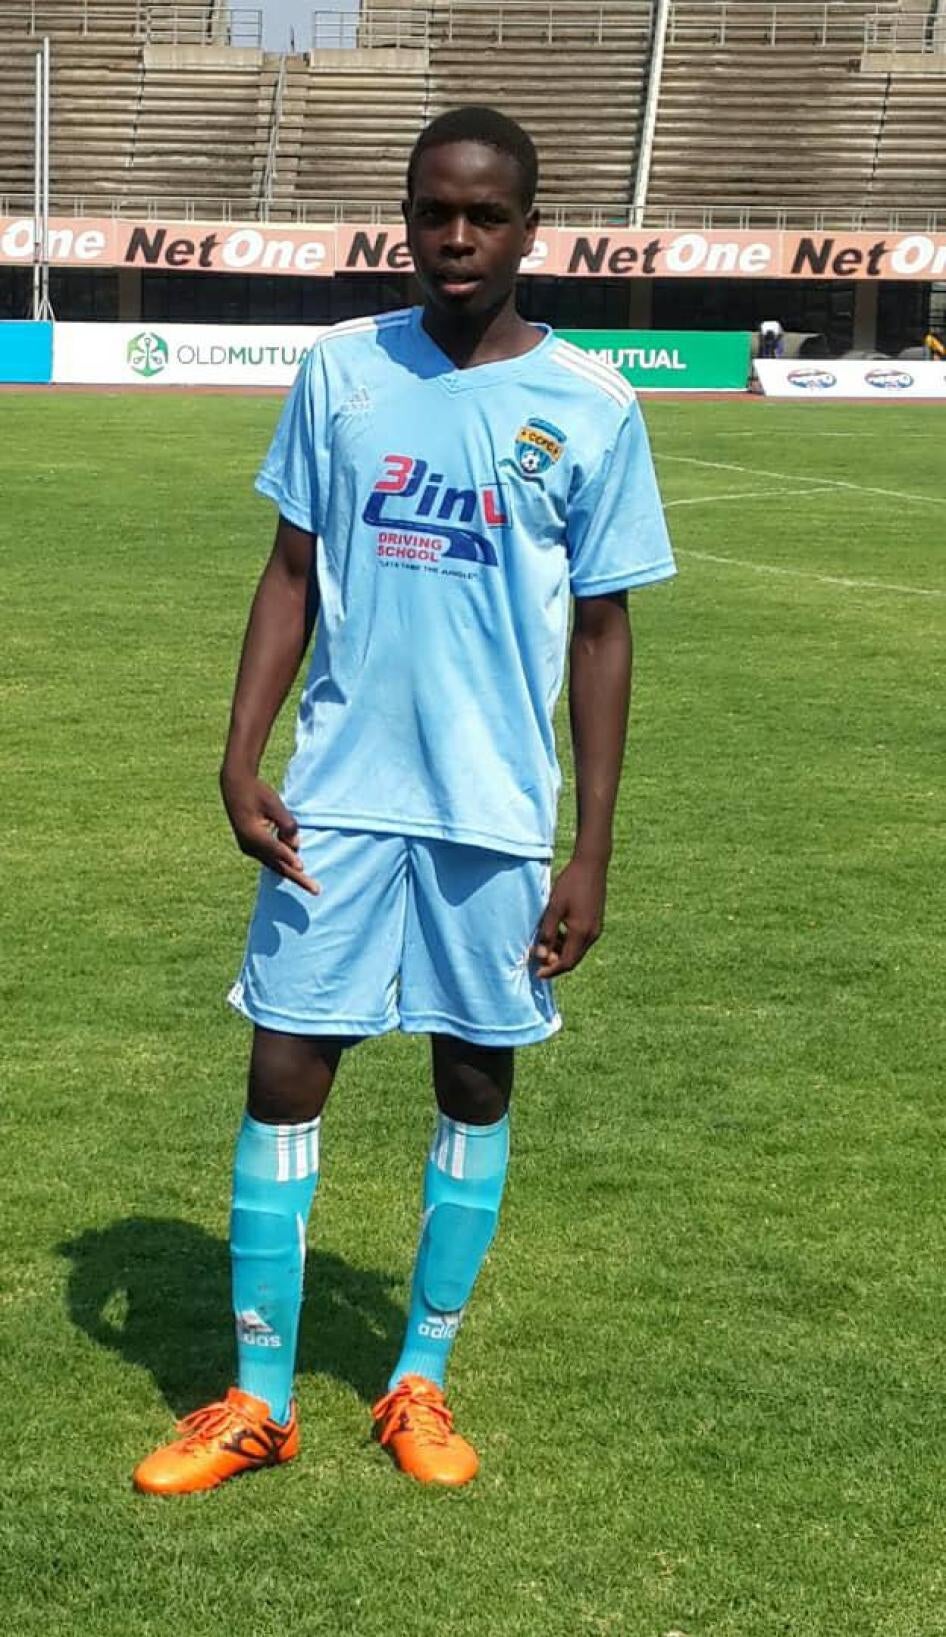 Family photo of Kelvin Tinashe Choto, 22-year-old footballer whom security forces shot in the head and killed on January 14, 2019.